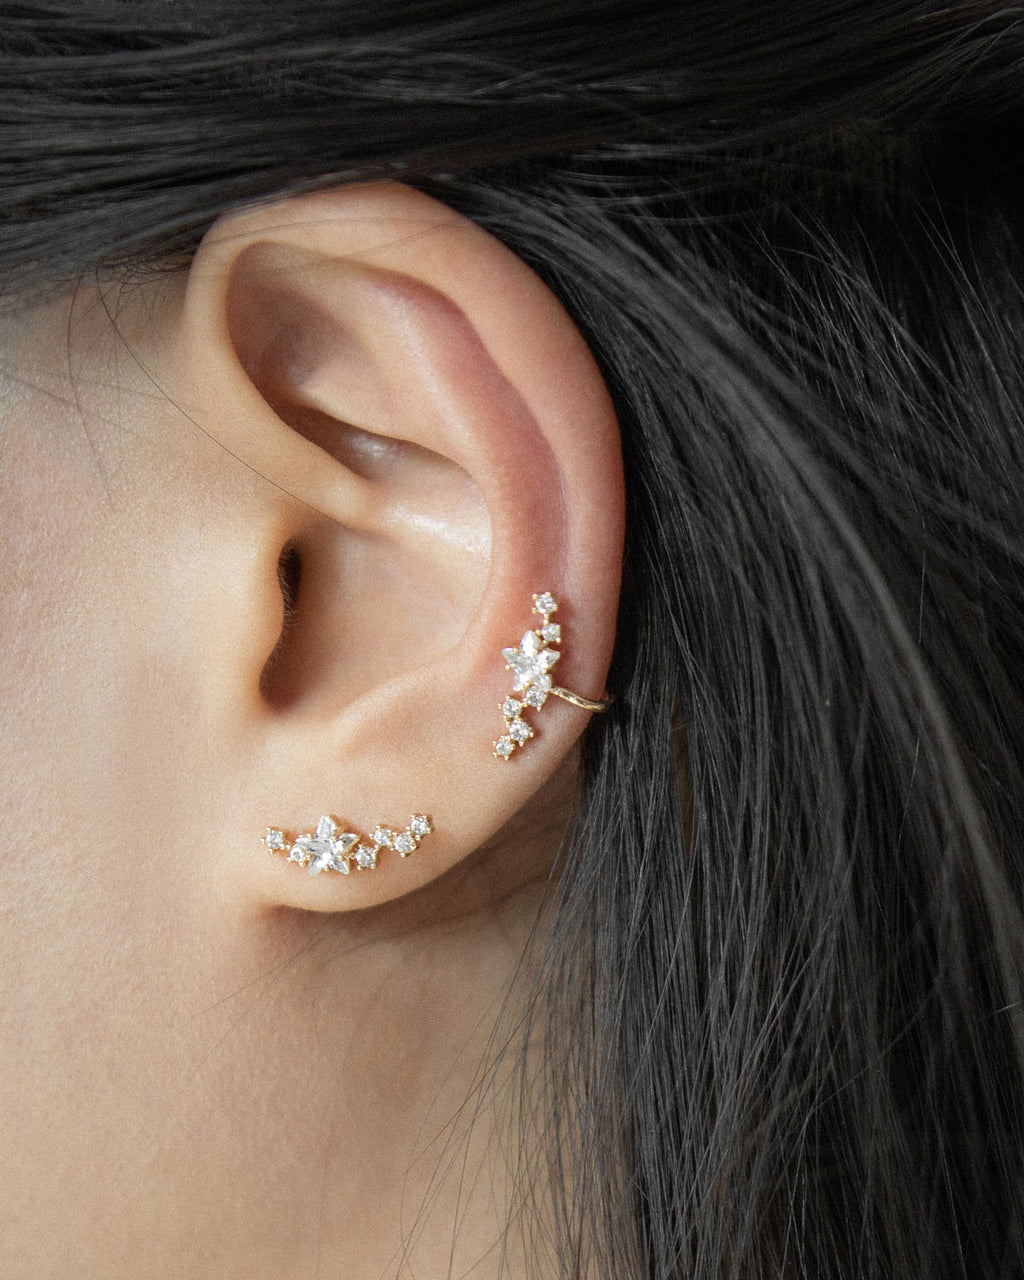 ear cartilage piercing care instructions